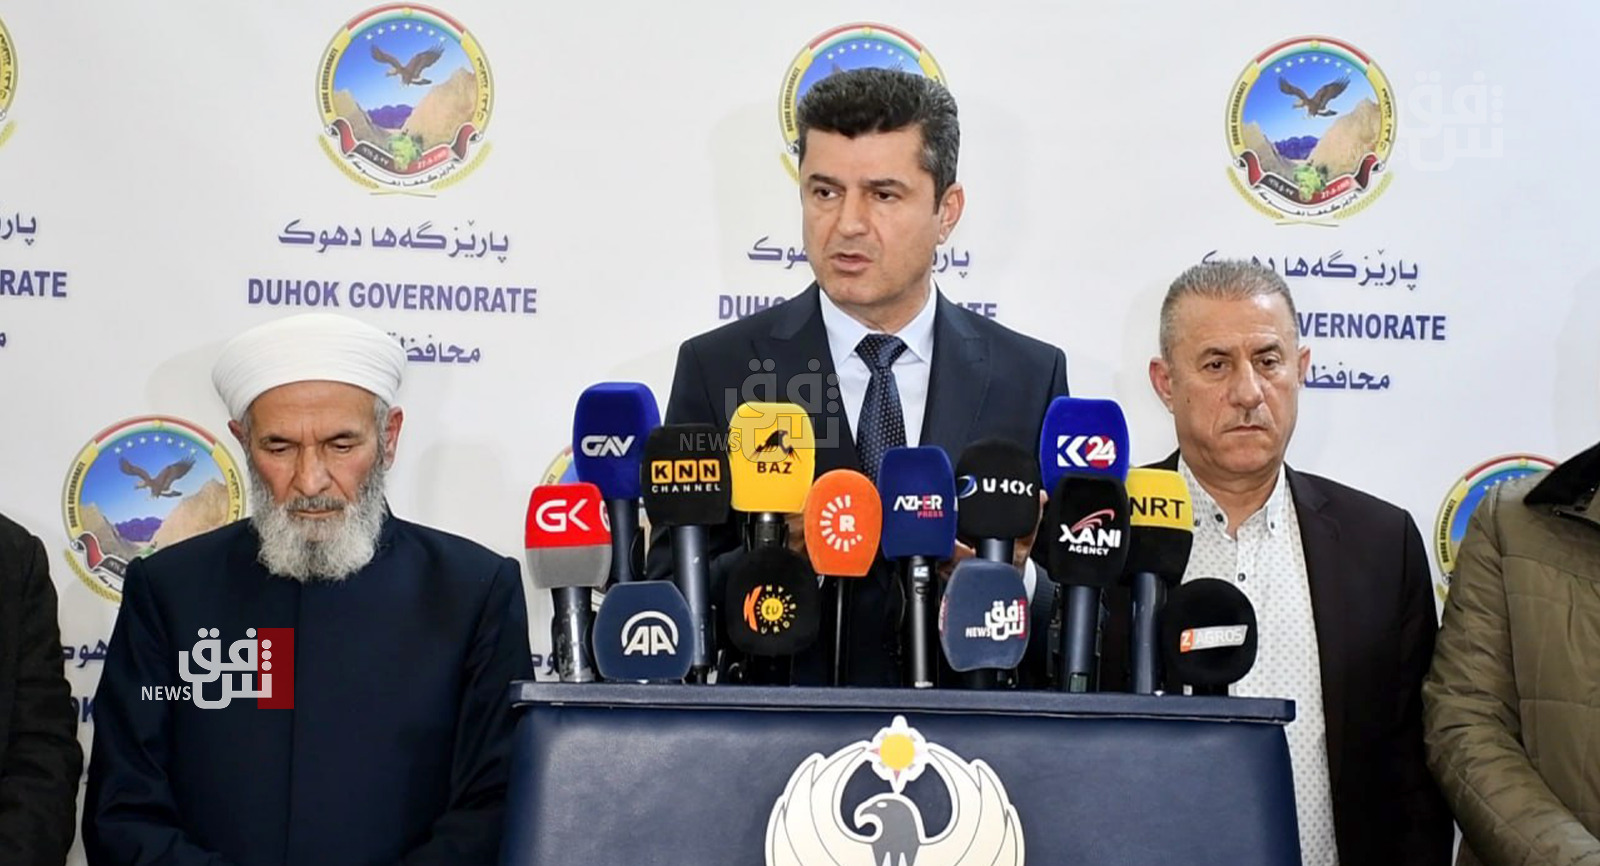 Governor the Iraqi government did not provide aid after floods